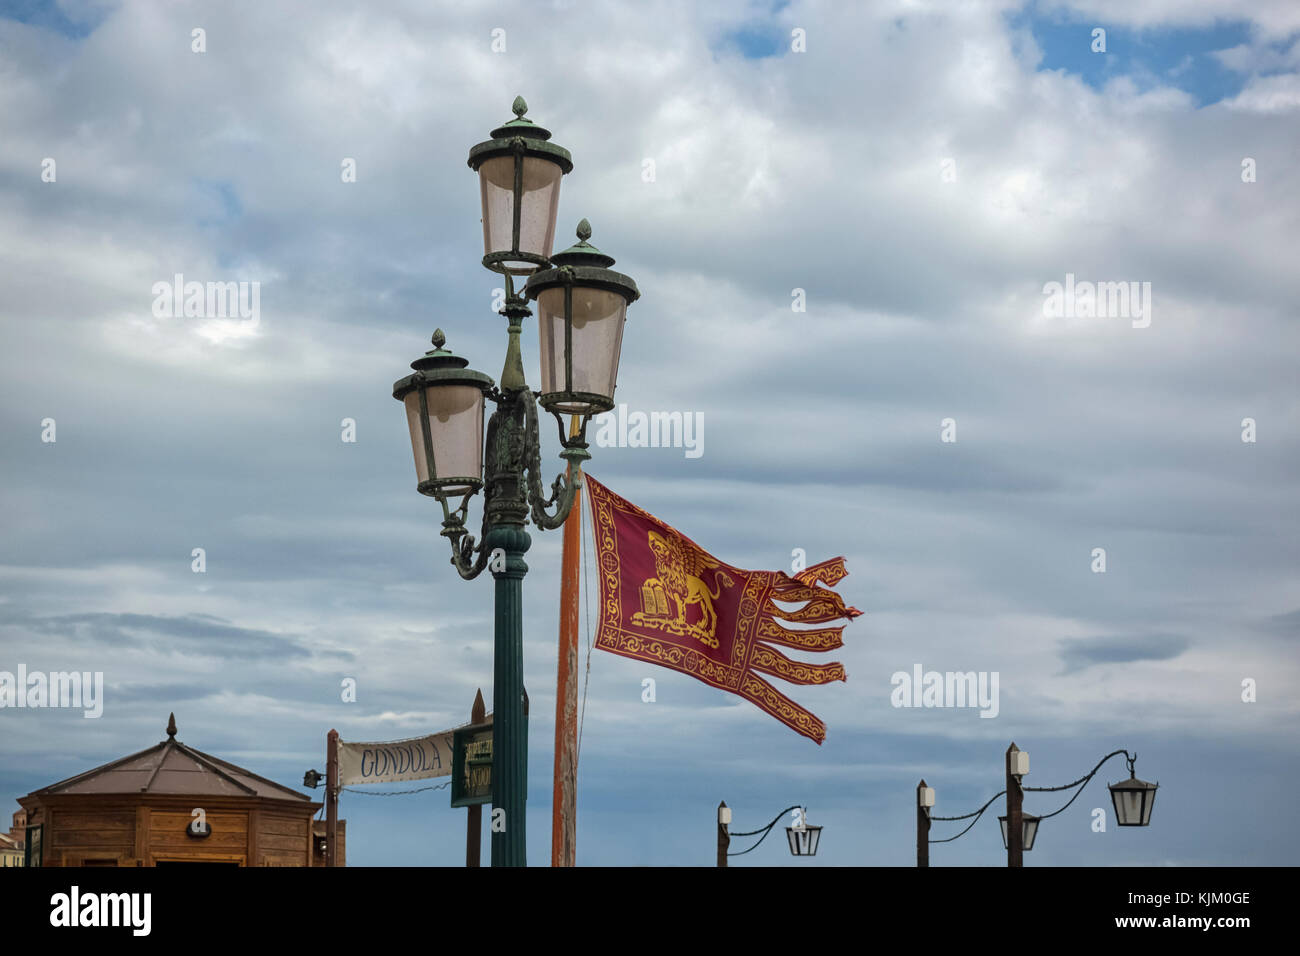 VENICE, ITALY - SEPTEMBER 12, 2017: The Heraldic Banner Flag of the City of Venice with the City's symbol of The Winged Lion of St. Marks flying along Stock Photo